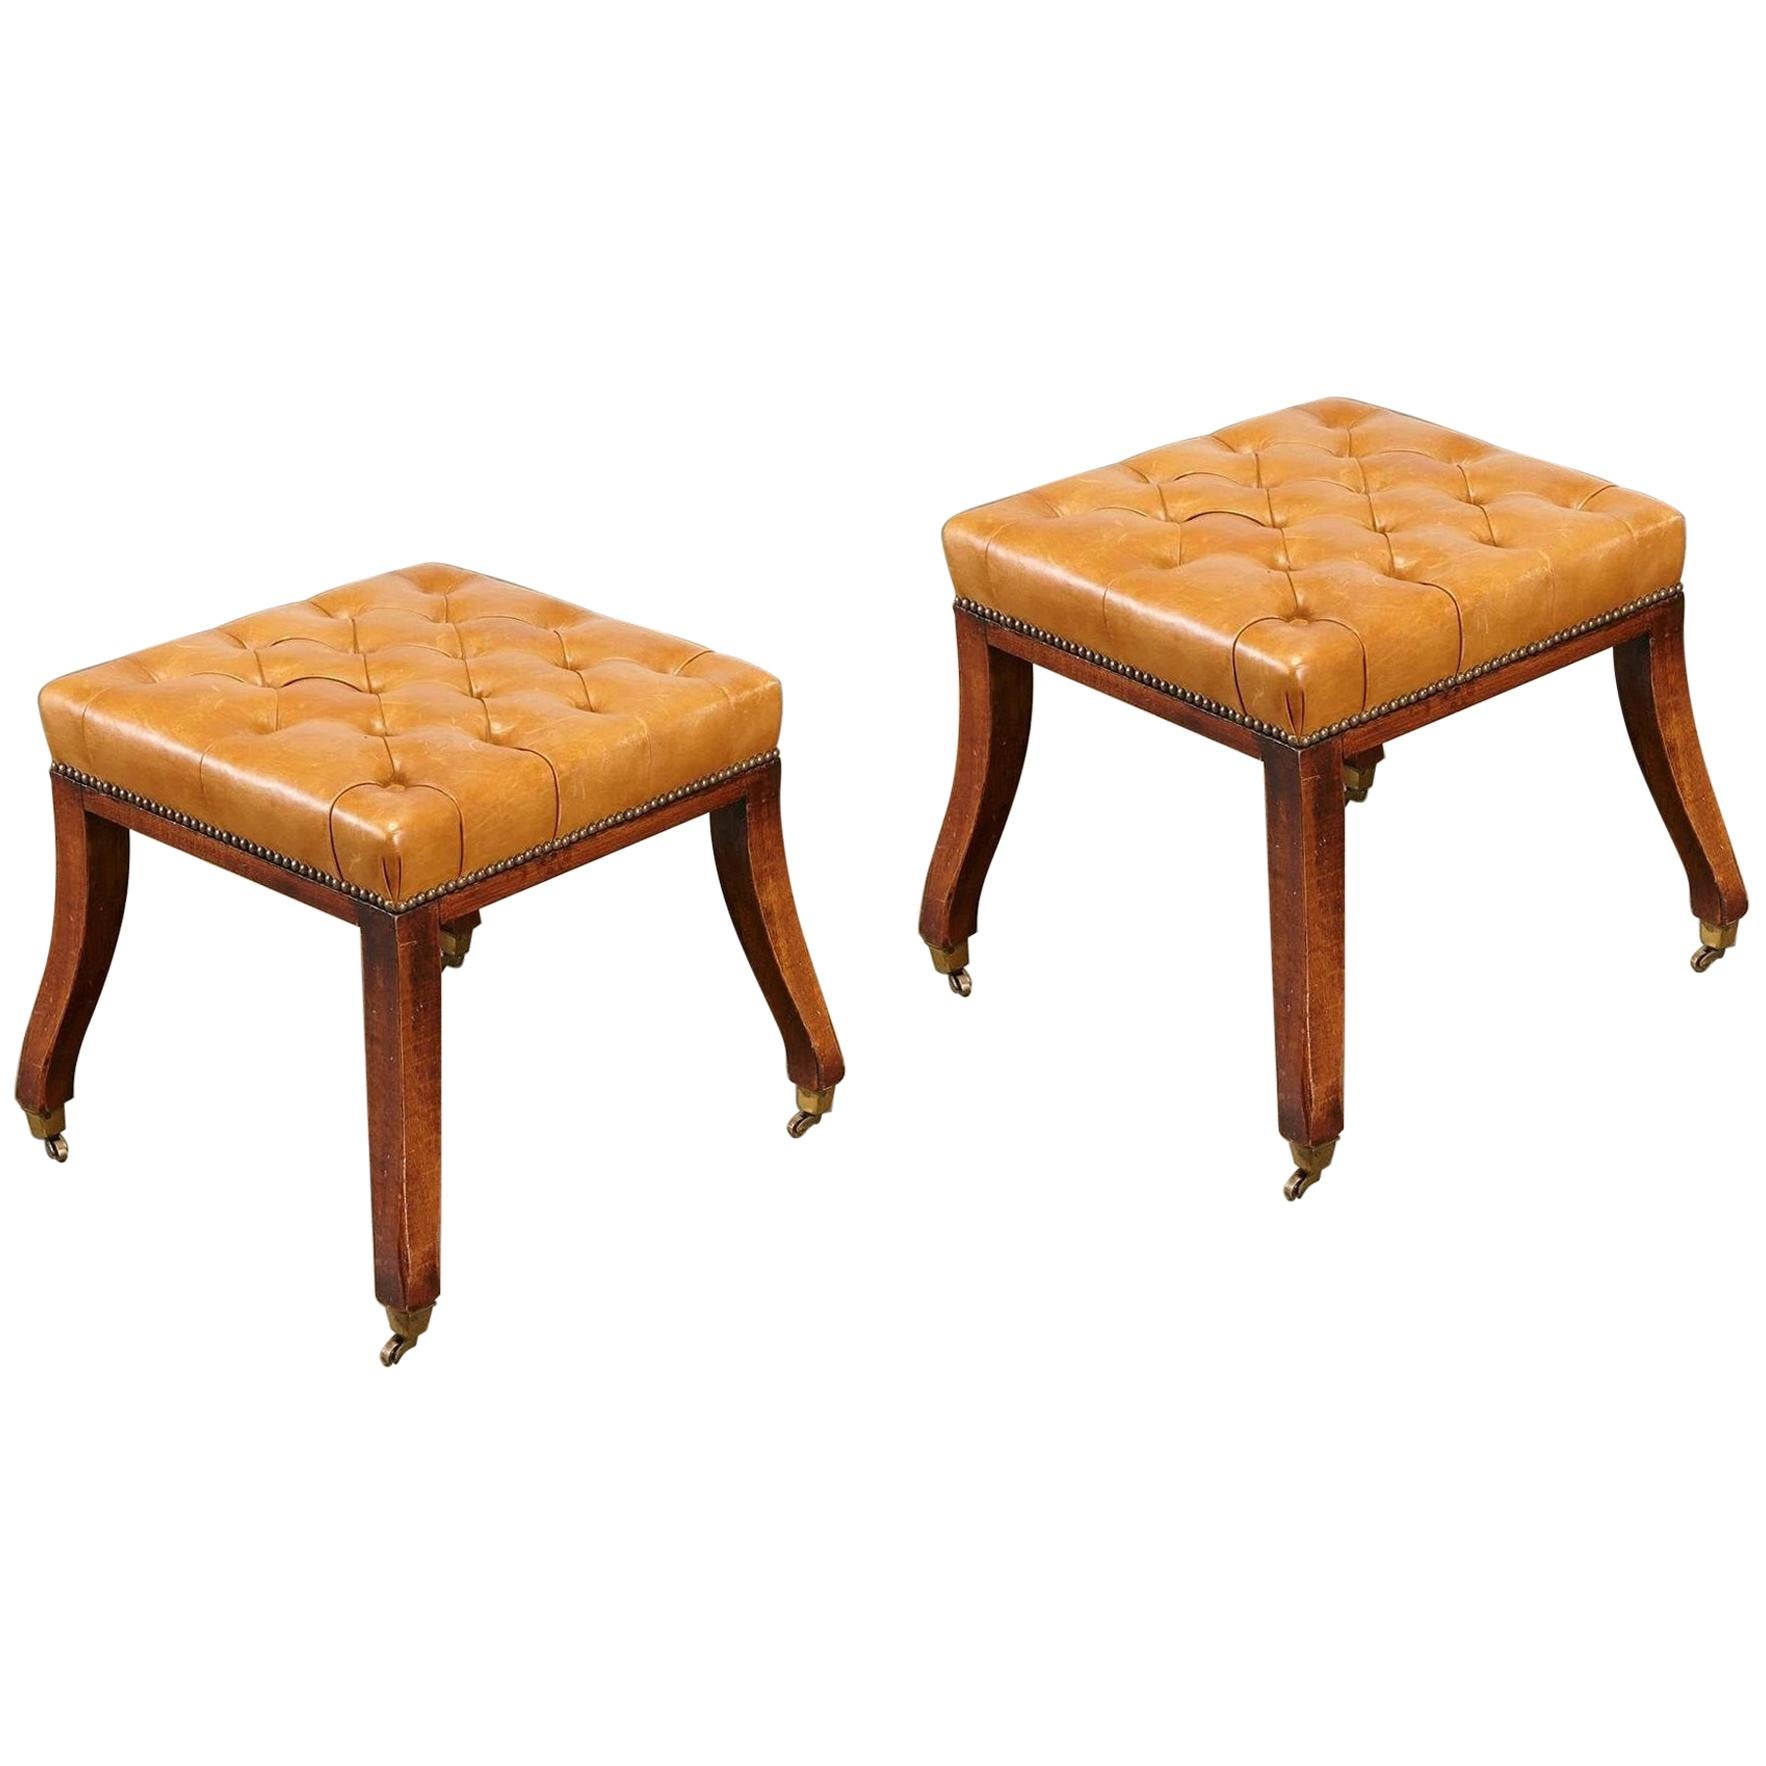 Pair of Regency Style Tufted Leather Stools